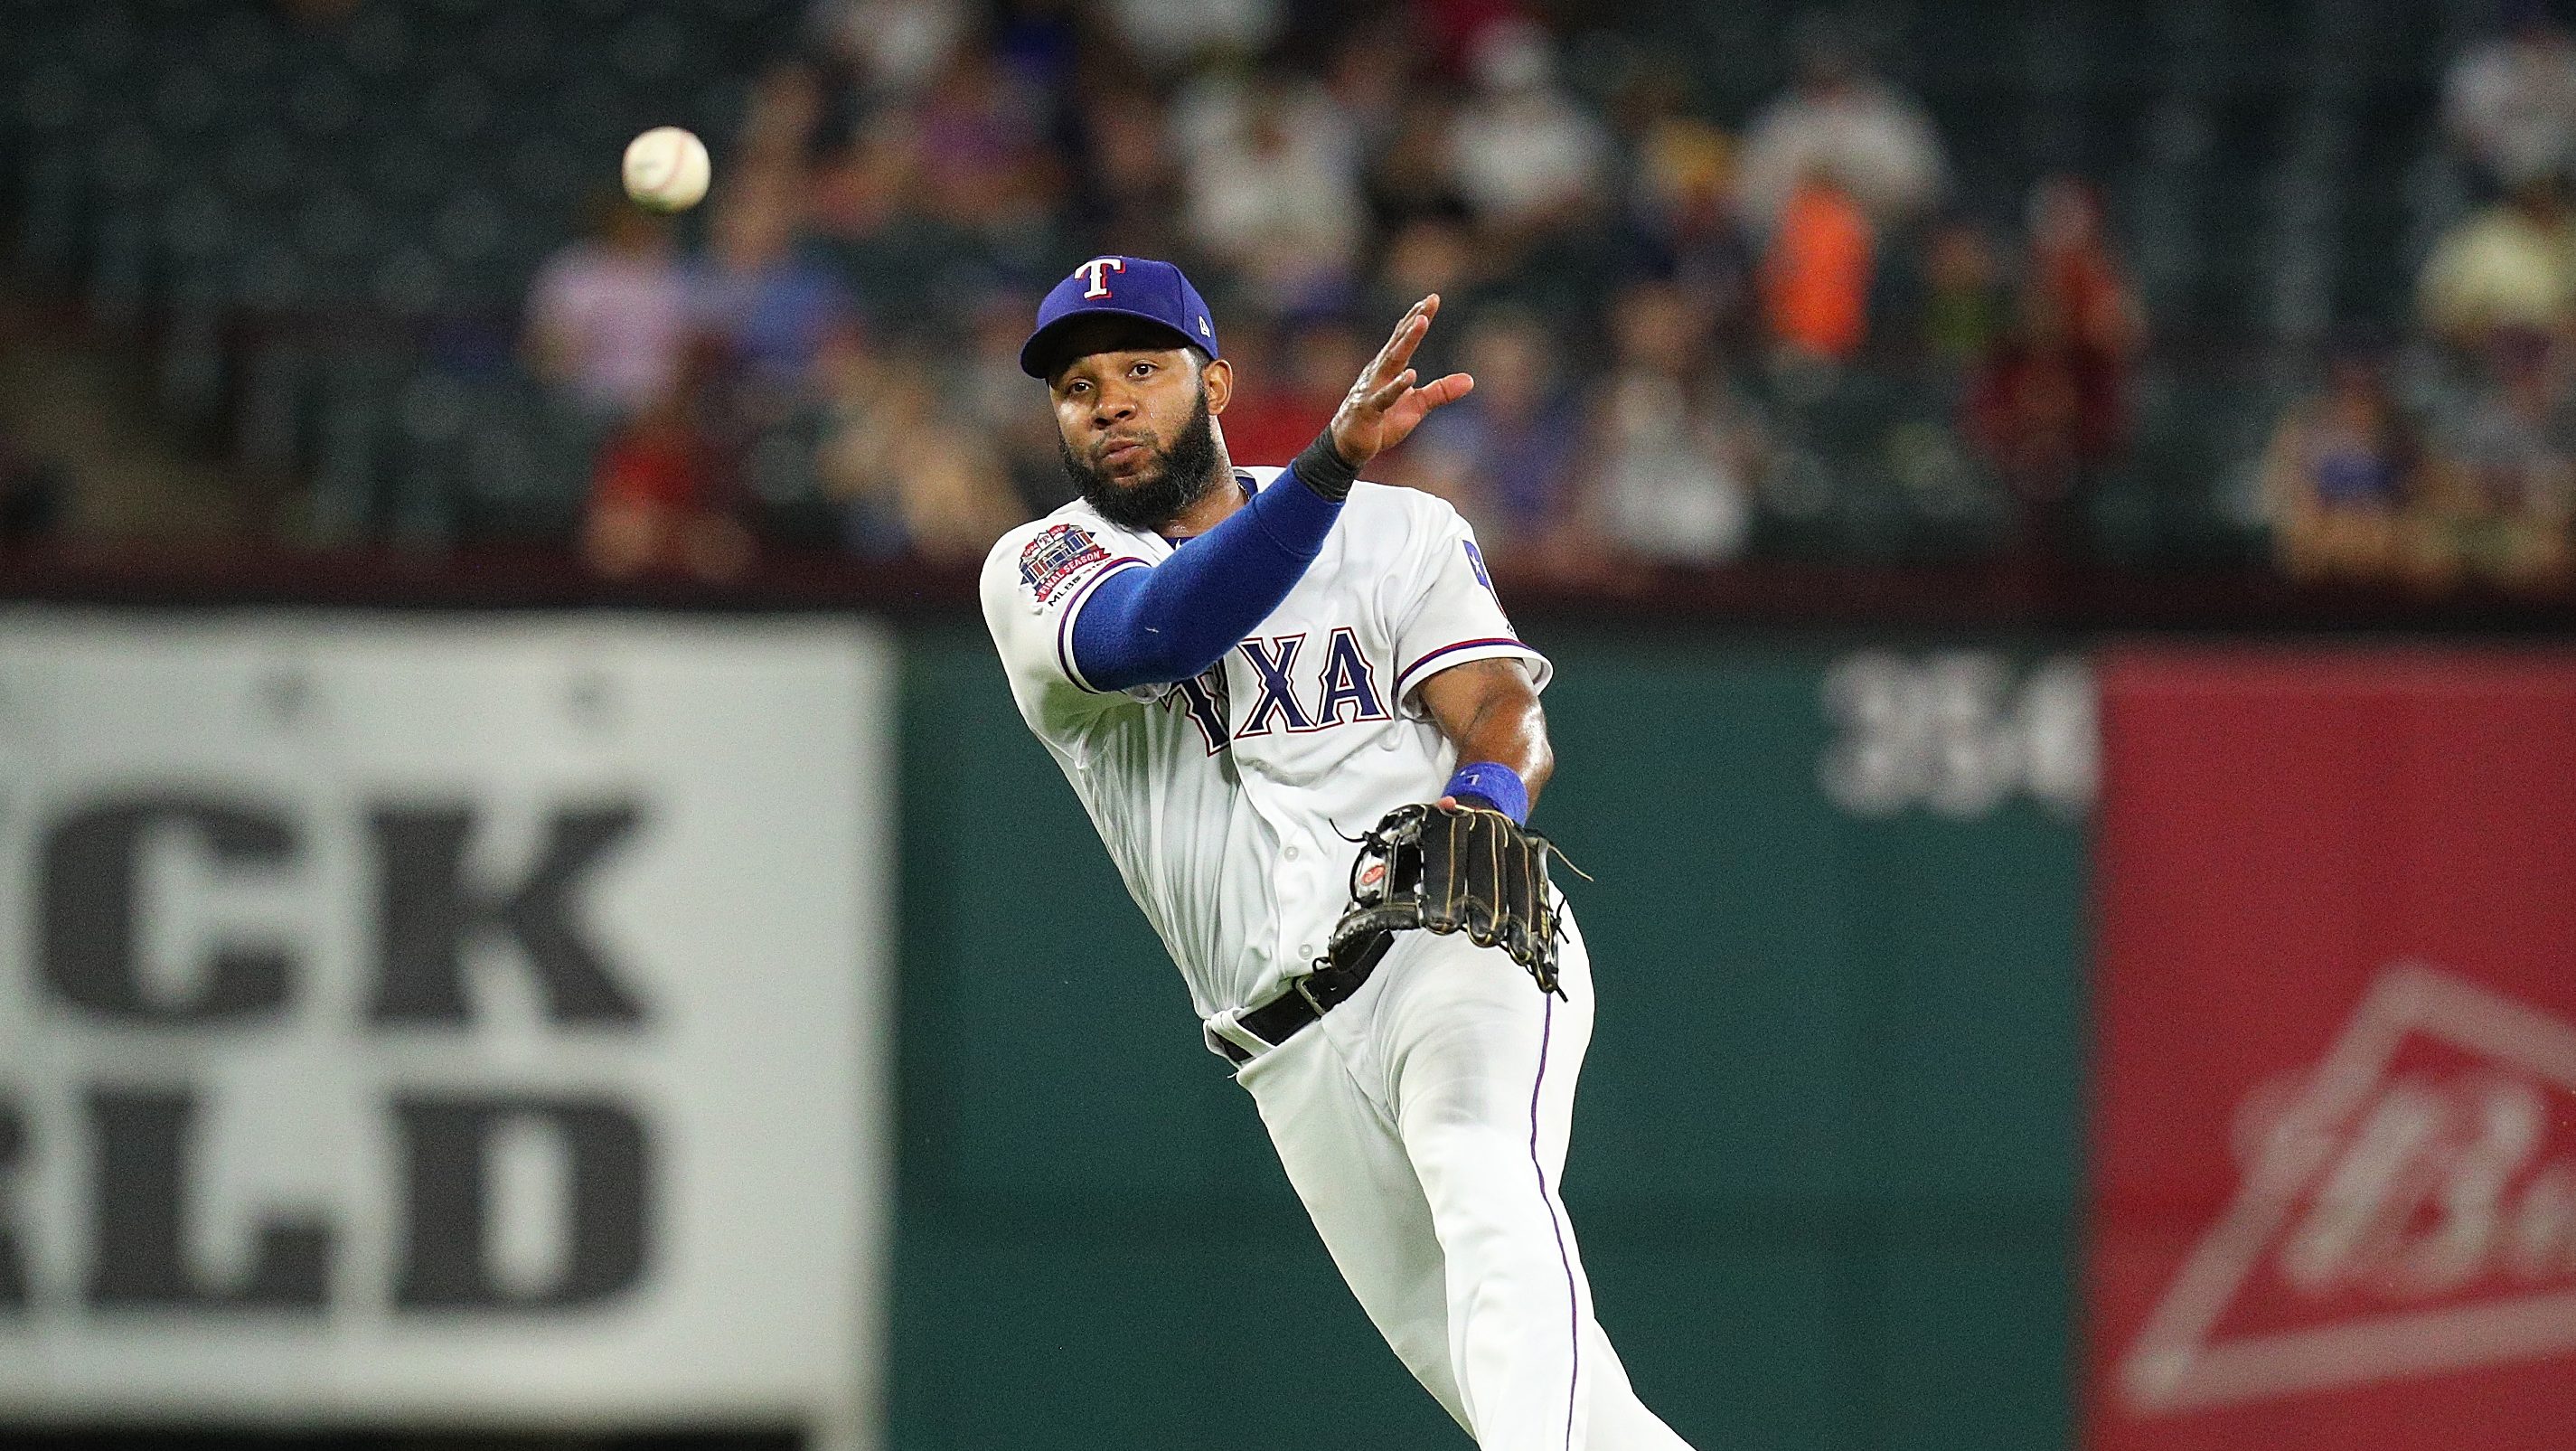 How to Watch Texas Rangers Games Without Cable 2020